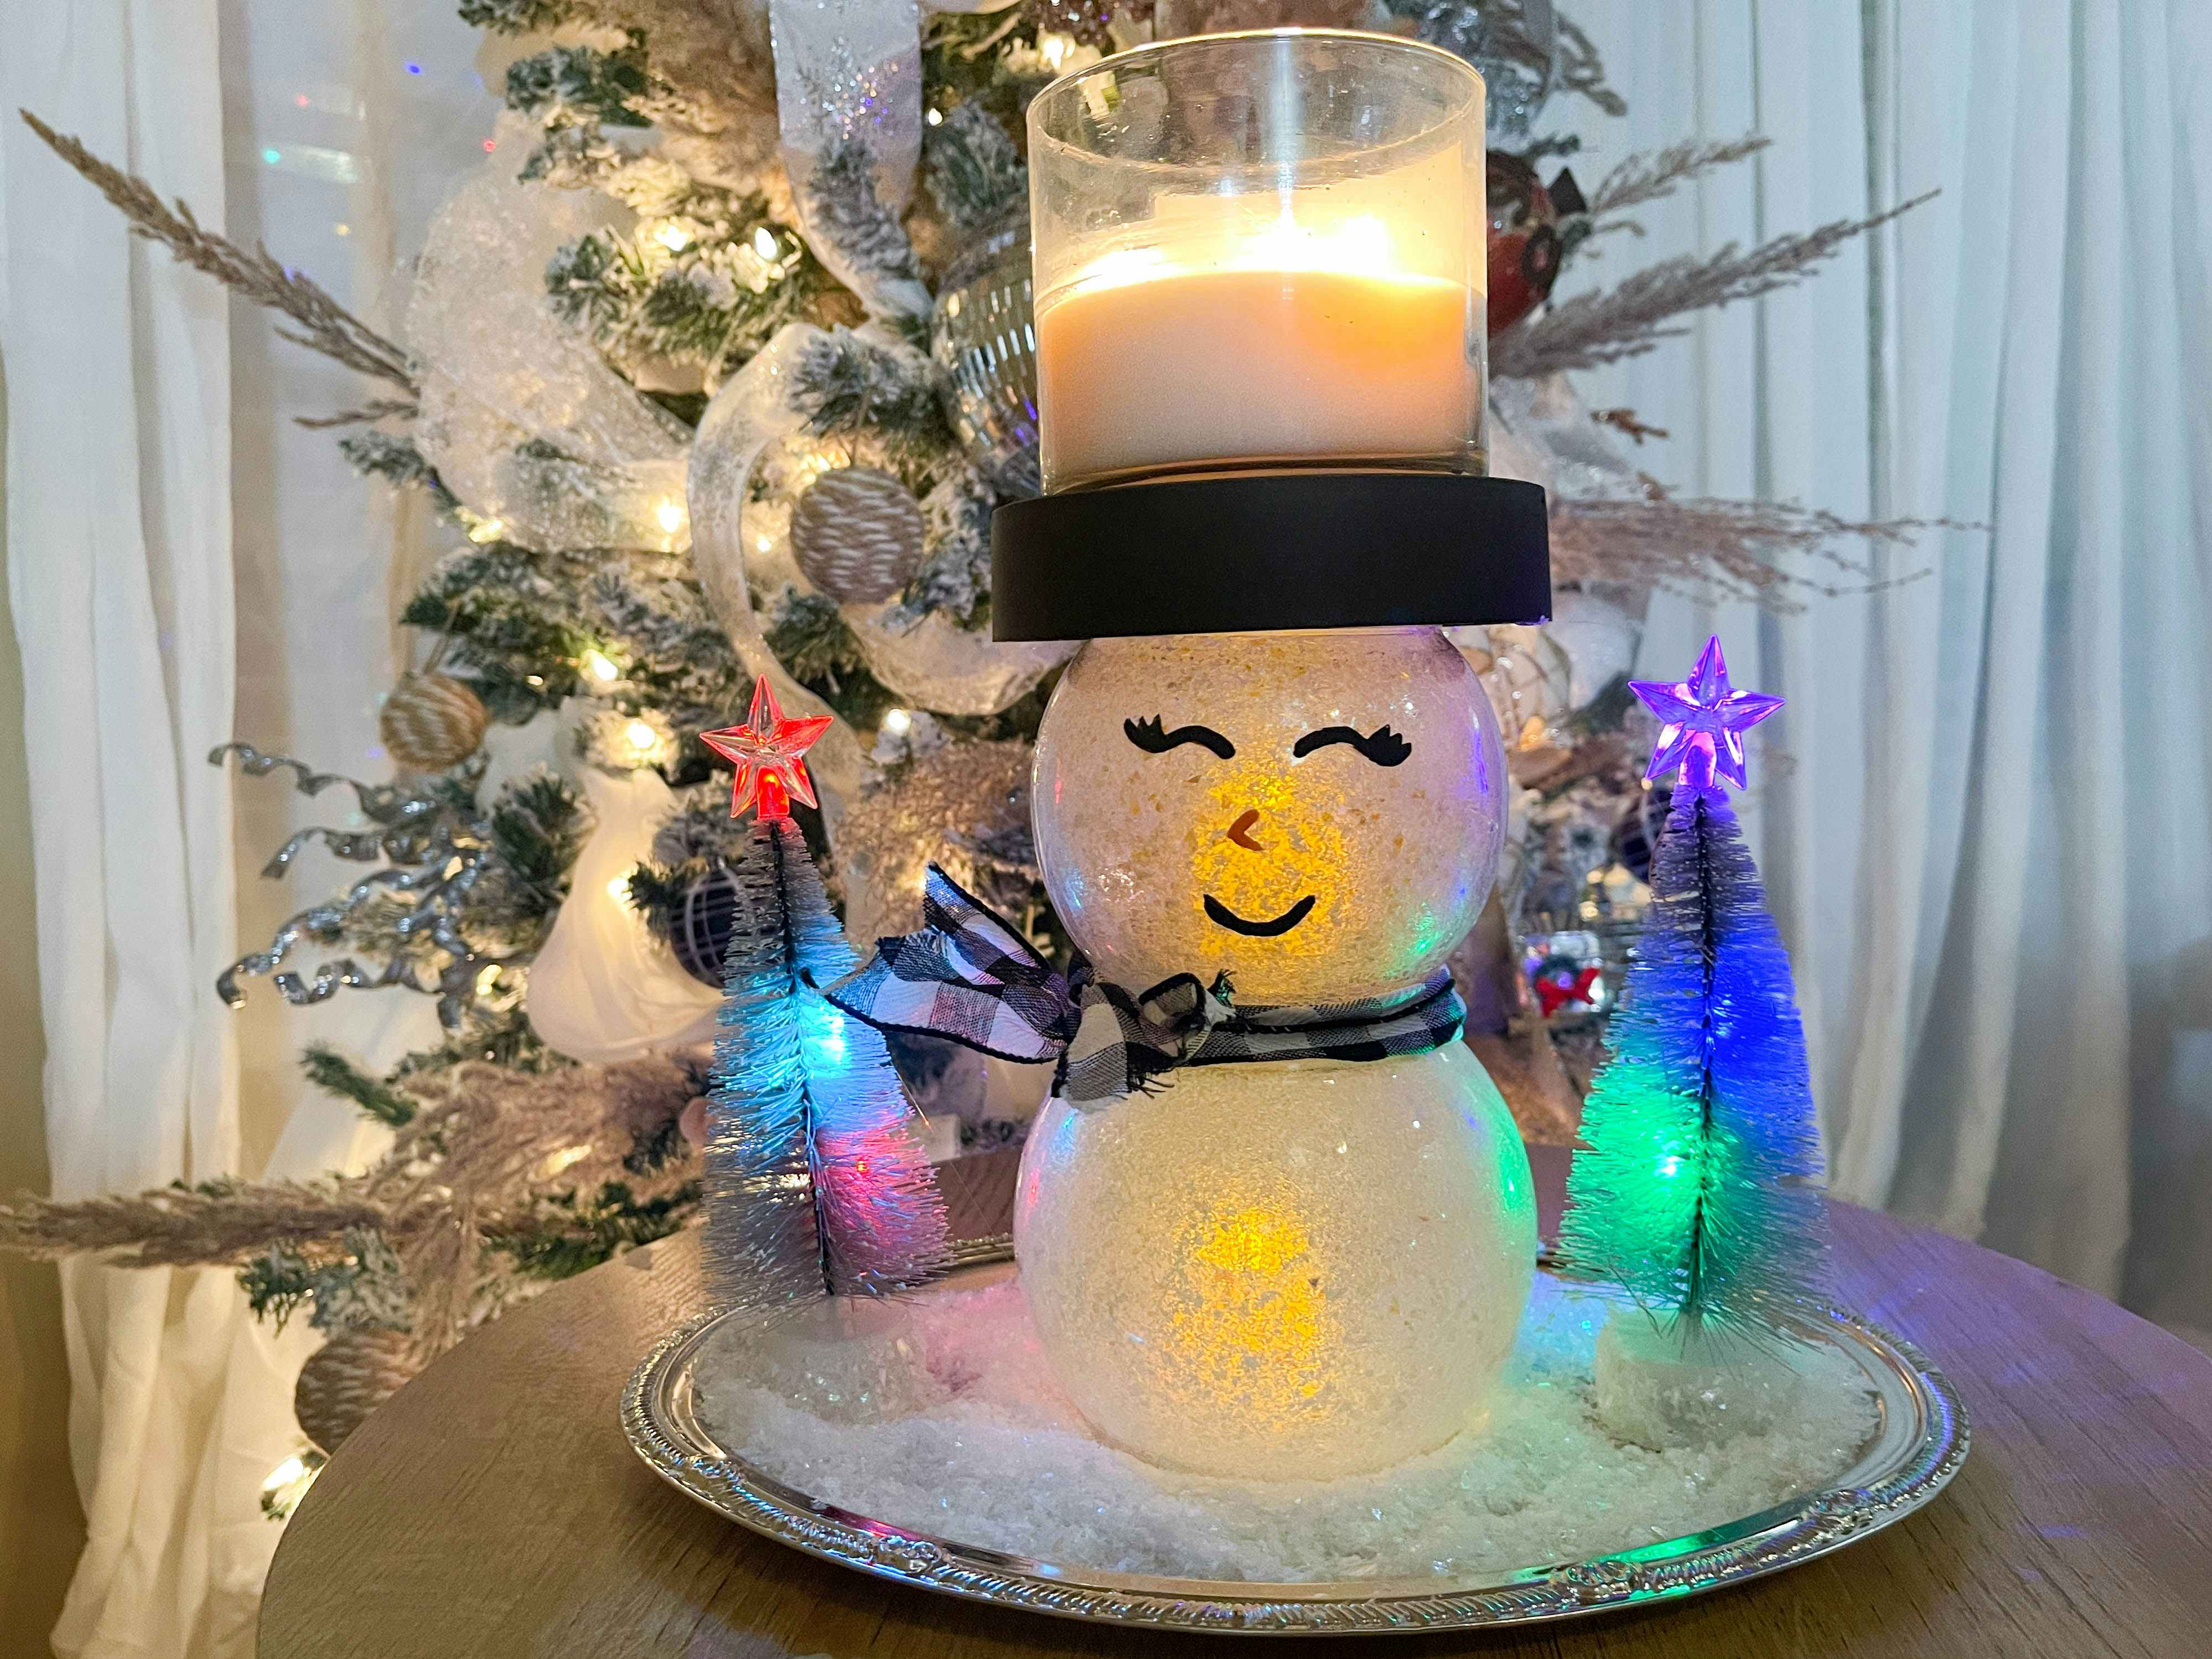 https://prod-cdn-thekrazycouponlady.imgix.net/wp-content/uploads/2022/12/diy-christmas-holiday-dollar-tree-snowman-candle-holder-2022-5-1670456406-1670456406.jpg?auto=format&fit=fill&q=25